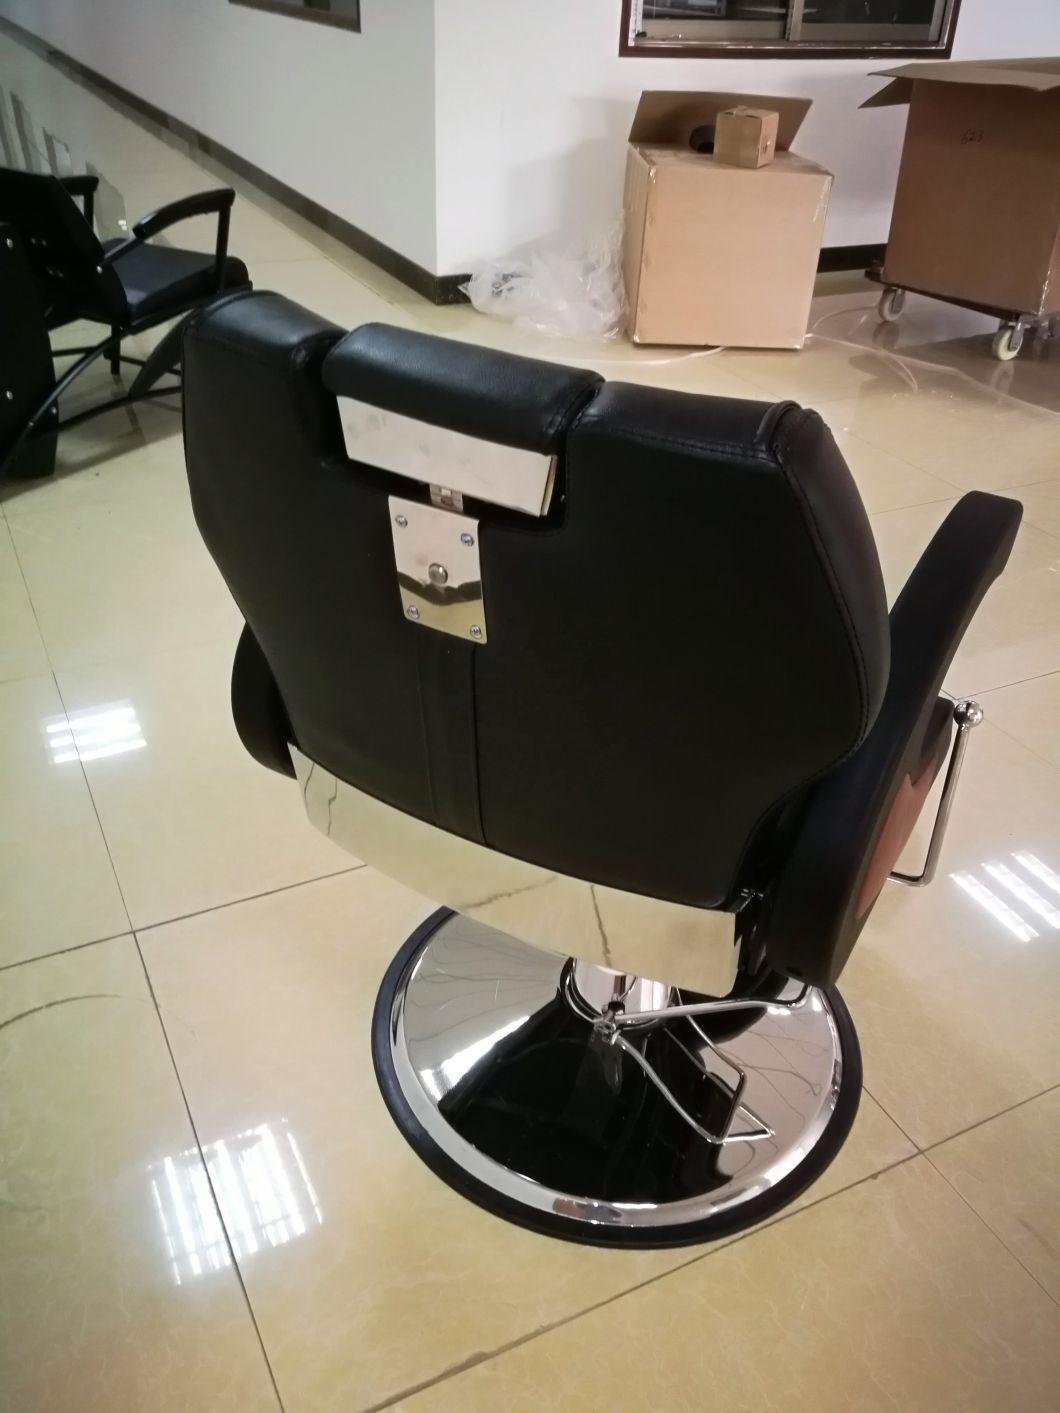 Hl-9254 Salon Barber Chair for Man or Woman with Stainless Steel Armrest and Aluminum Pedal